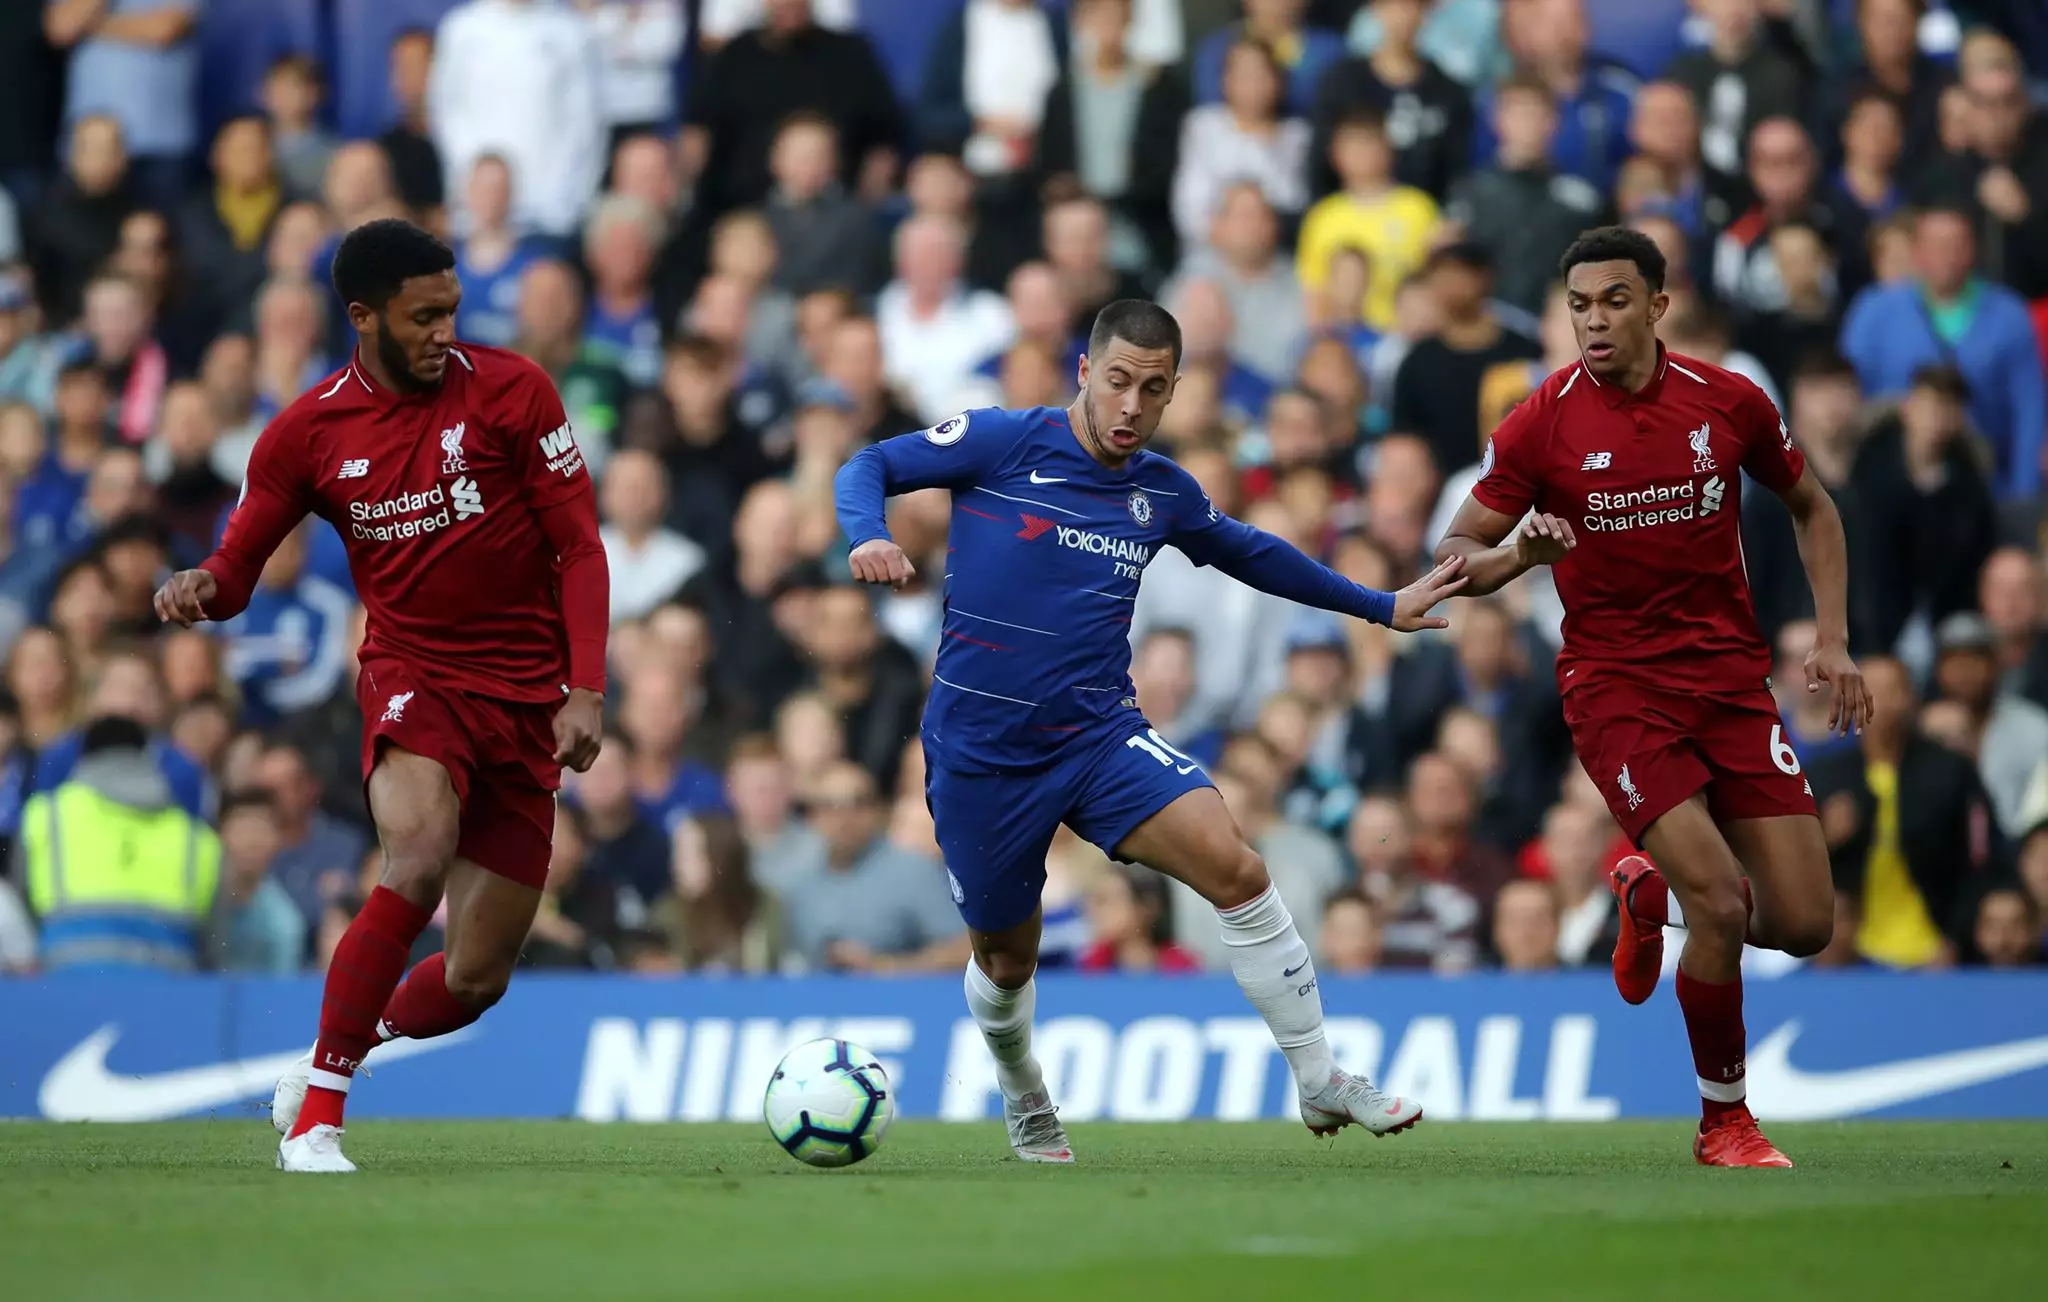 Hazard in action for Chelsea. Image: PA